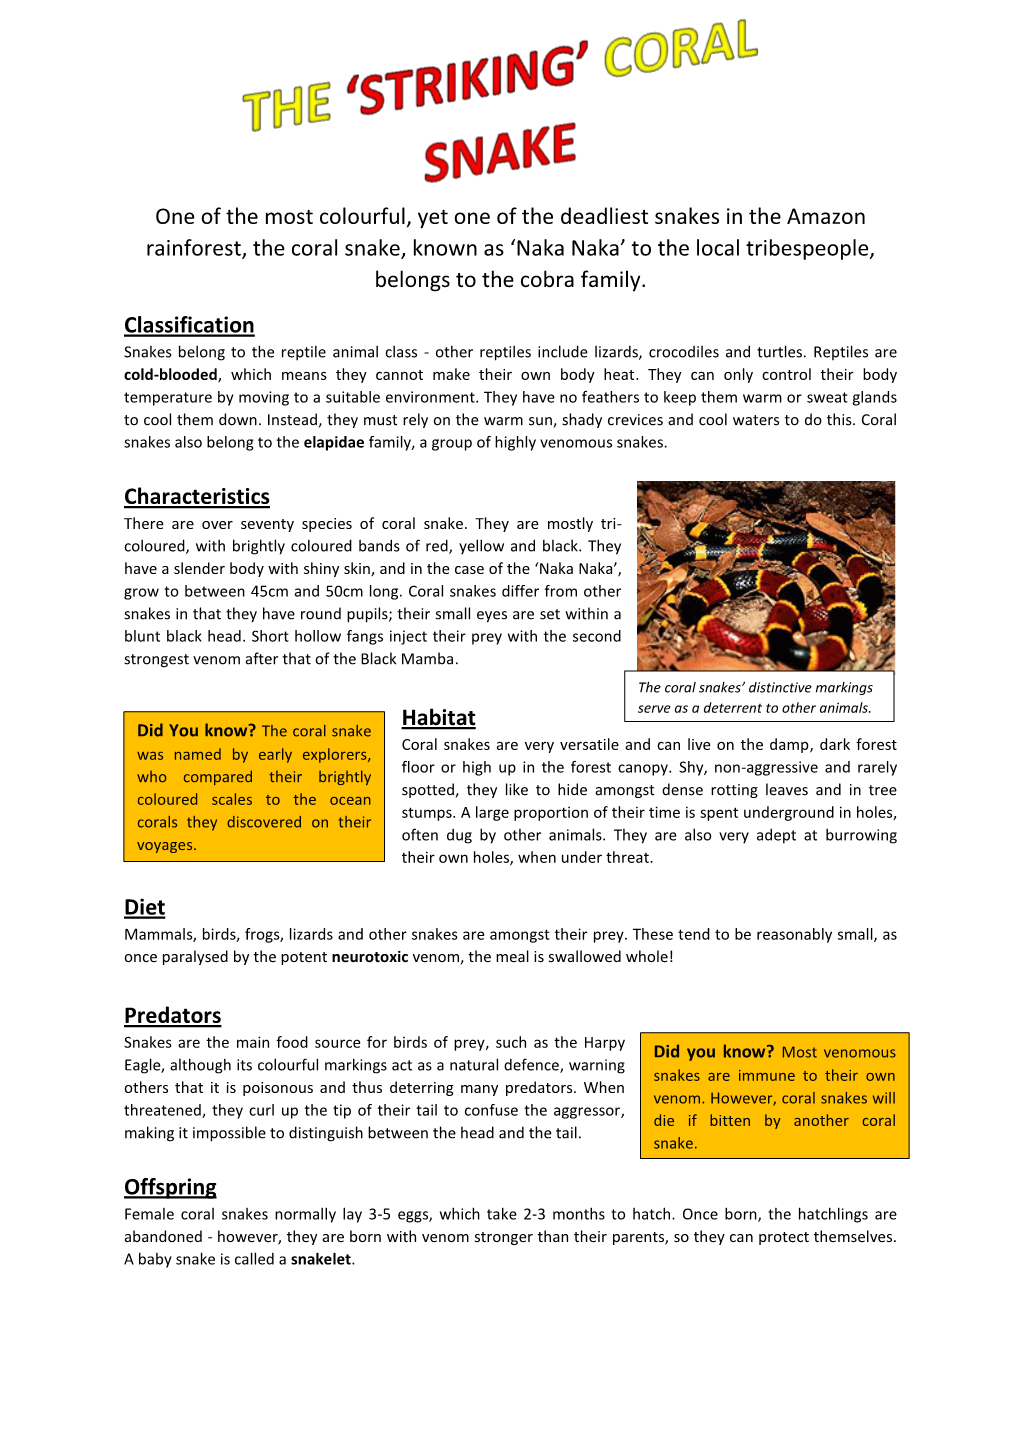 Mrs Smith's the Striking Coral Snake Non-Chronological Report